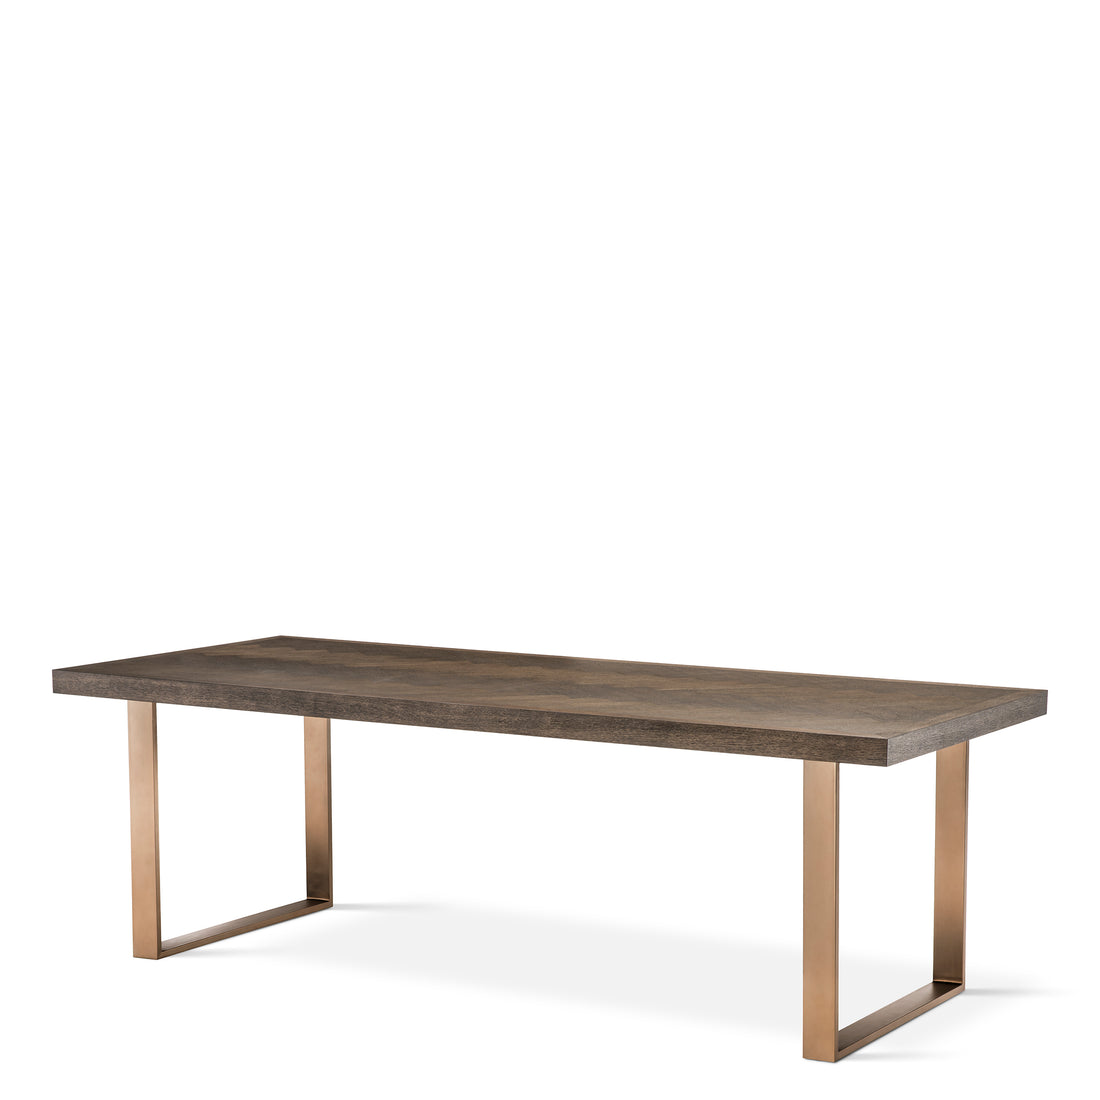 Dining Table Melchior  230 cm